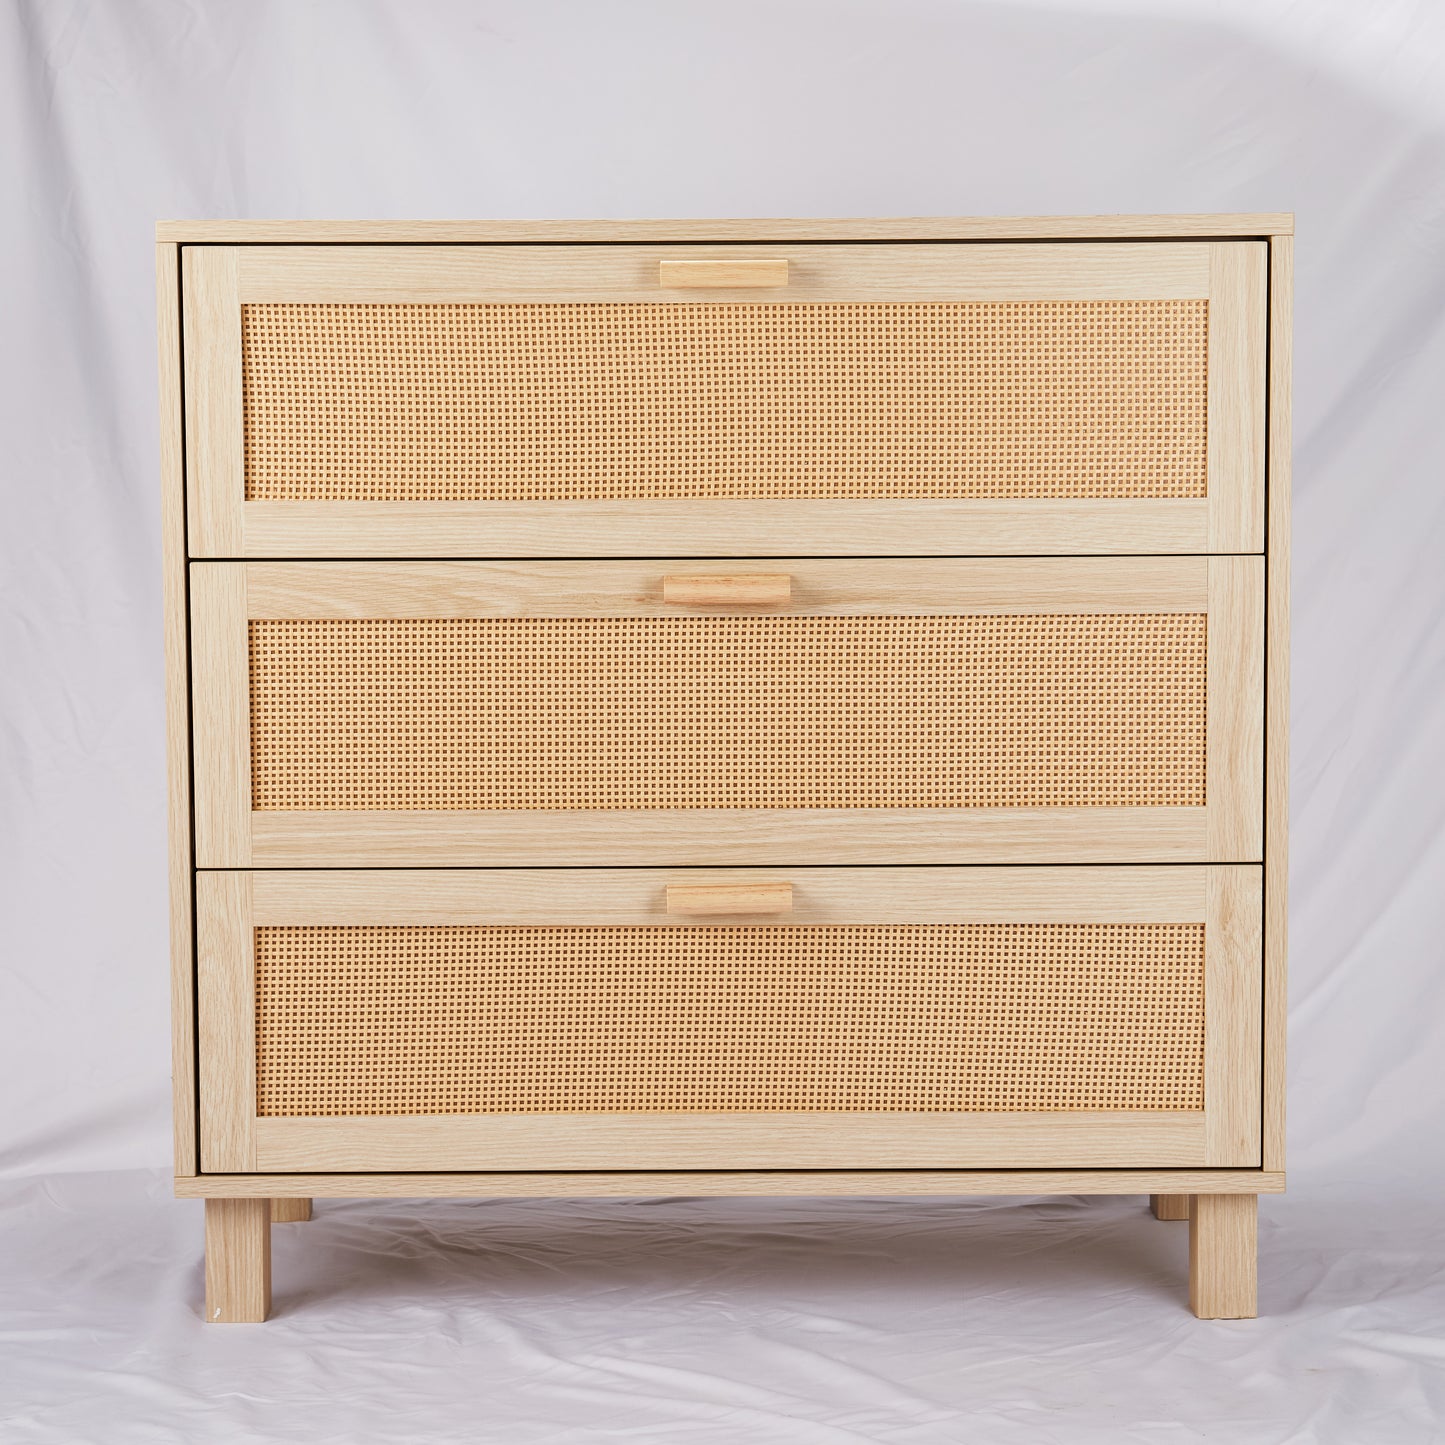 Rattan Dresser, Rattan Chest of Drawers, Closet Storage Oak Drawer Chest for Bedroom, 2 to 6 Rattan Drawers, Rattan Dresser for Bedroom